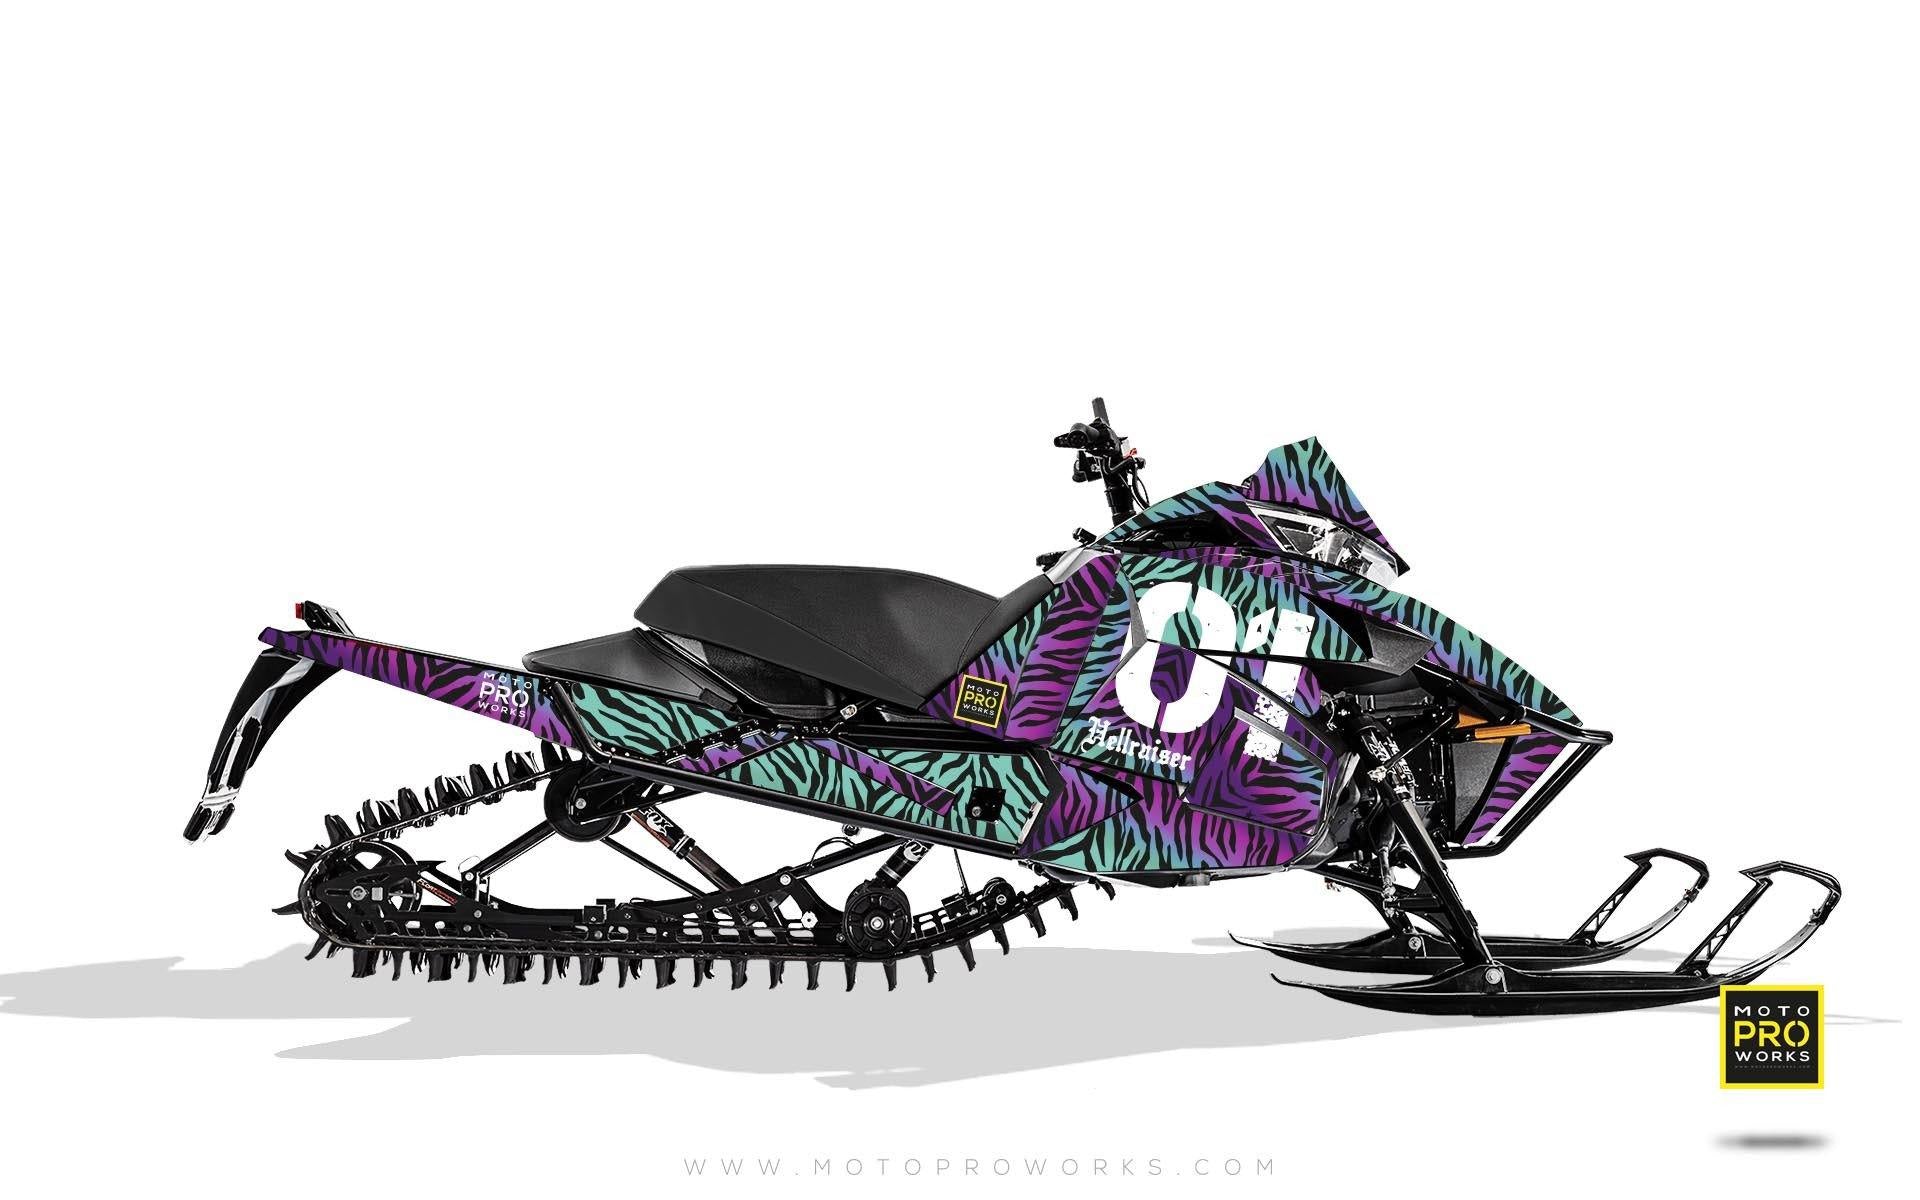 Arctic Cat Graphics - "Stripey" (purple) - MotoProWorks | Decals and Bike Graphic kit